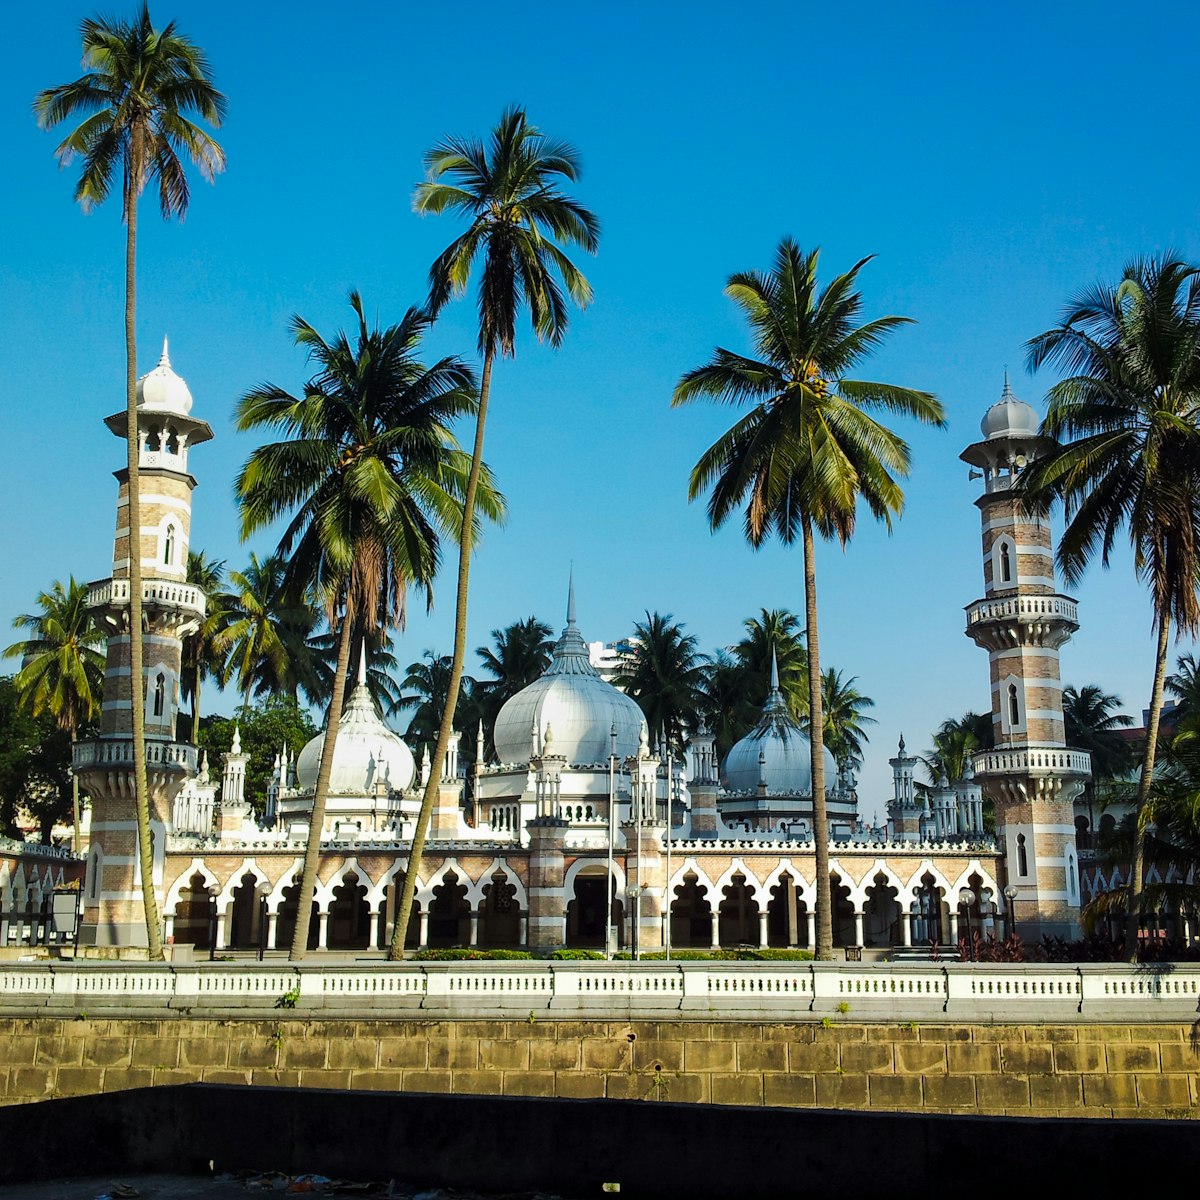 [UNVERIFIED CONTENT] Masjid Jamek is the oldest mosque in Kuala Lumpur. It is located at the confluence of the Klang and Gombak river. It was built in 1907 and officially open by the then Sultan Selangor in 1909.